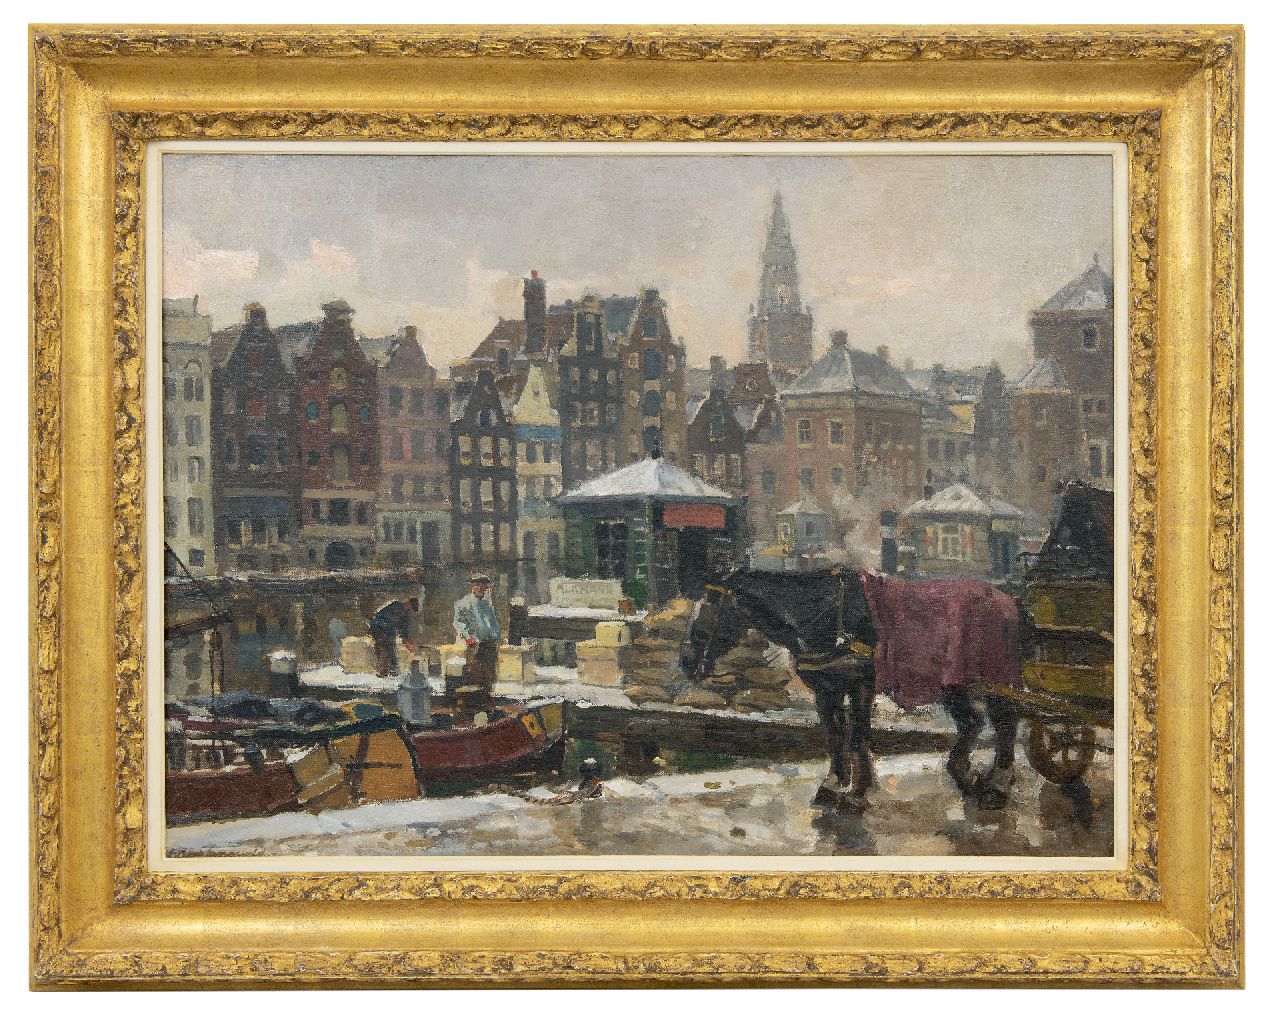 Langeveld F.A.  | Franciscus Arnoldus 'Frans' Langeveld | Paintings offered for sale | The Damrak in Amsterdam, oil on canvas 61.0 x 81.2 cm, signed l.l.